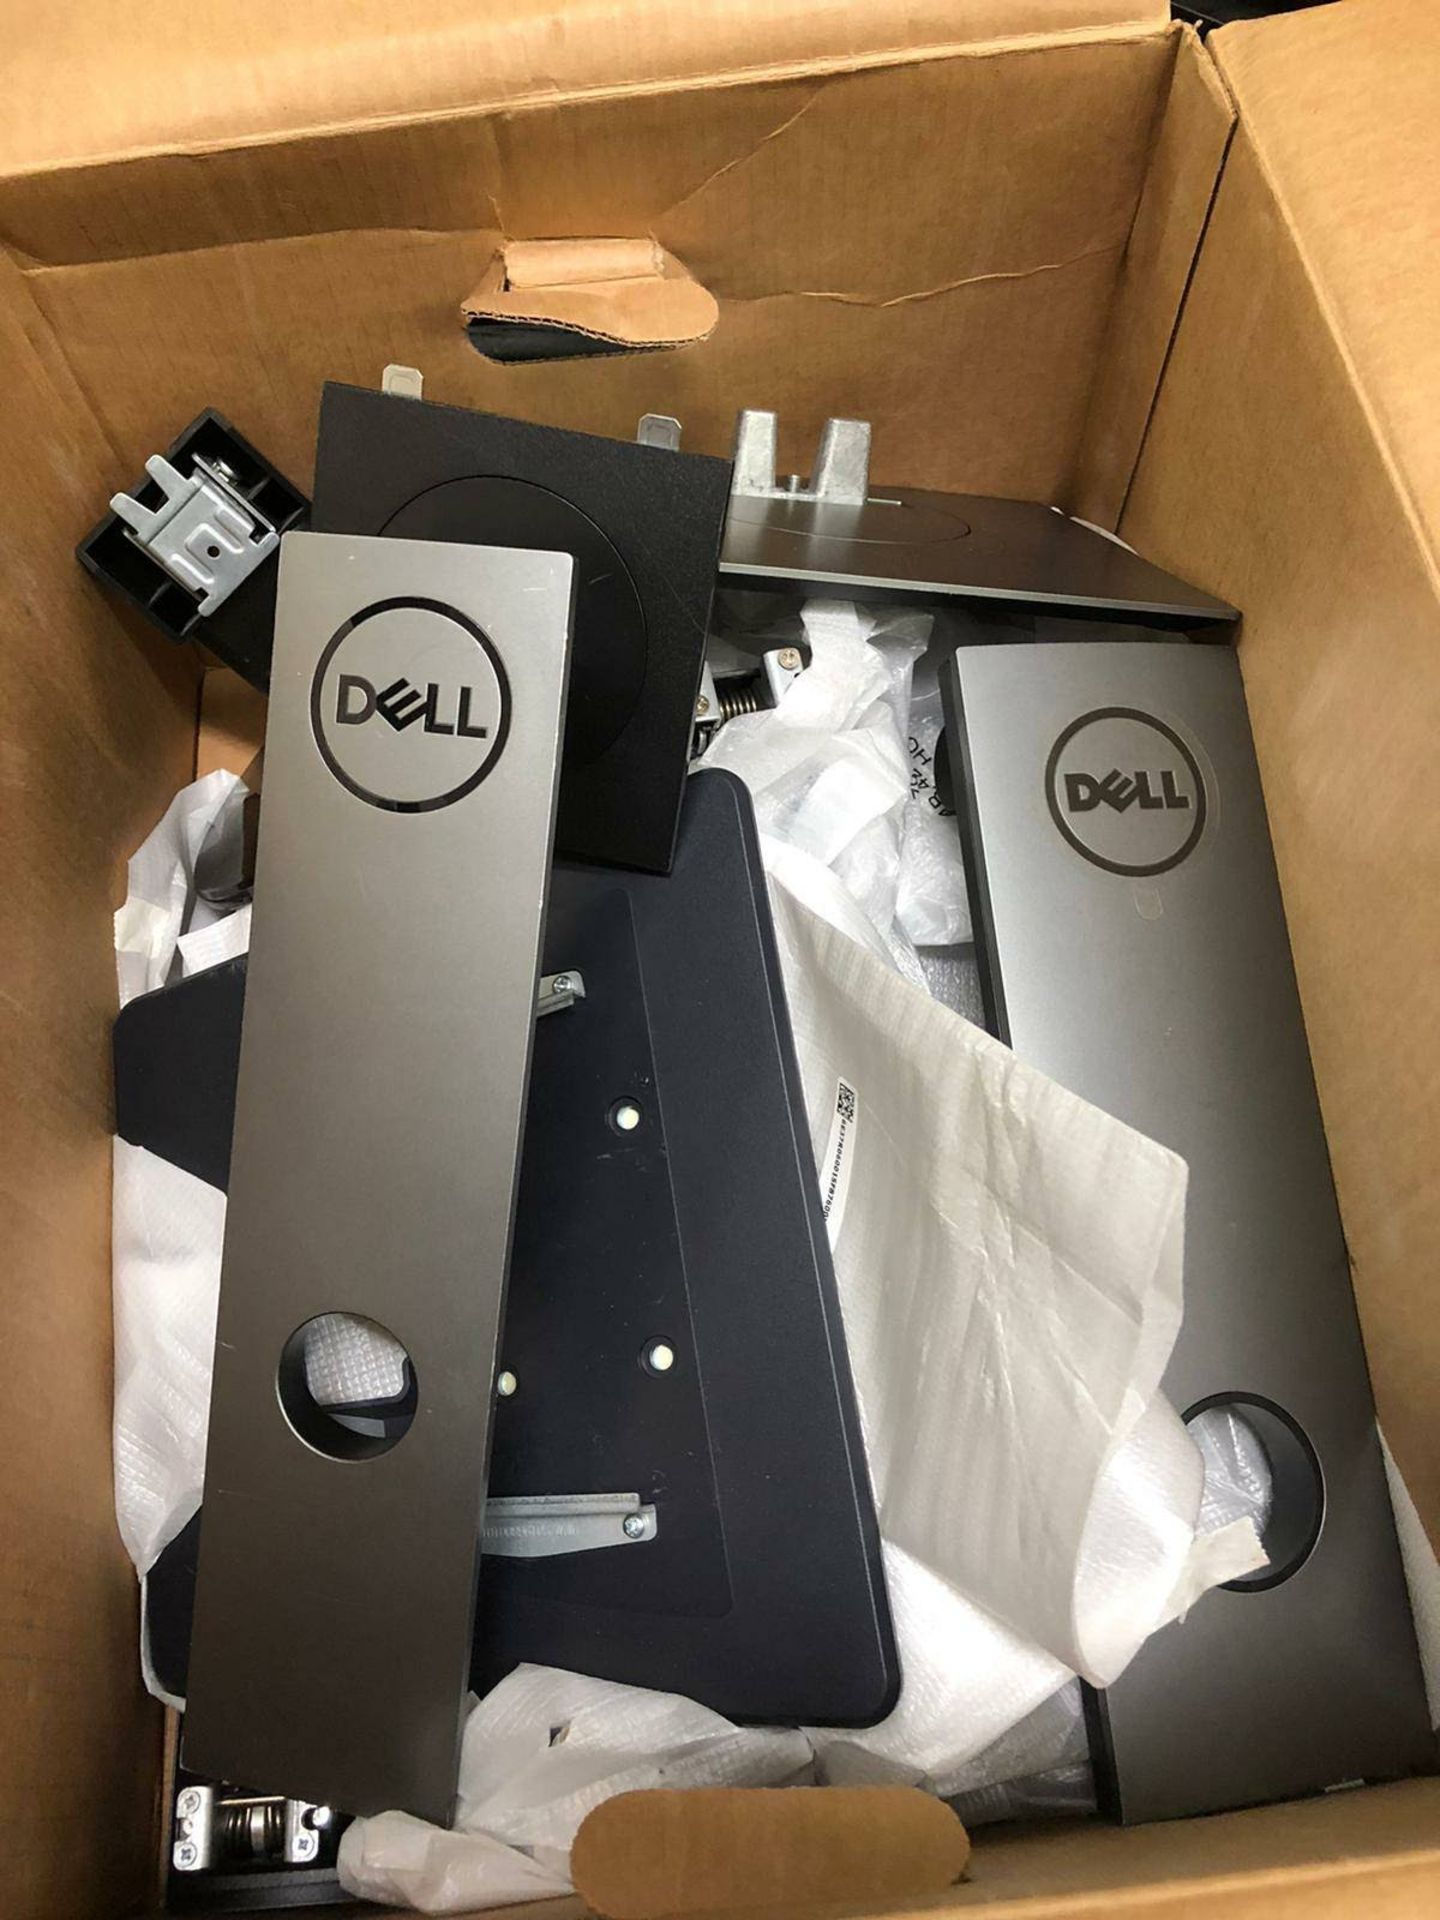 Mini HP Towers, and New Dell Monitor Stands - Image 7 of 7